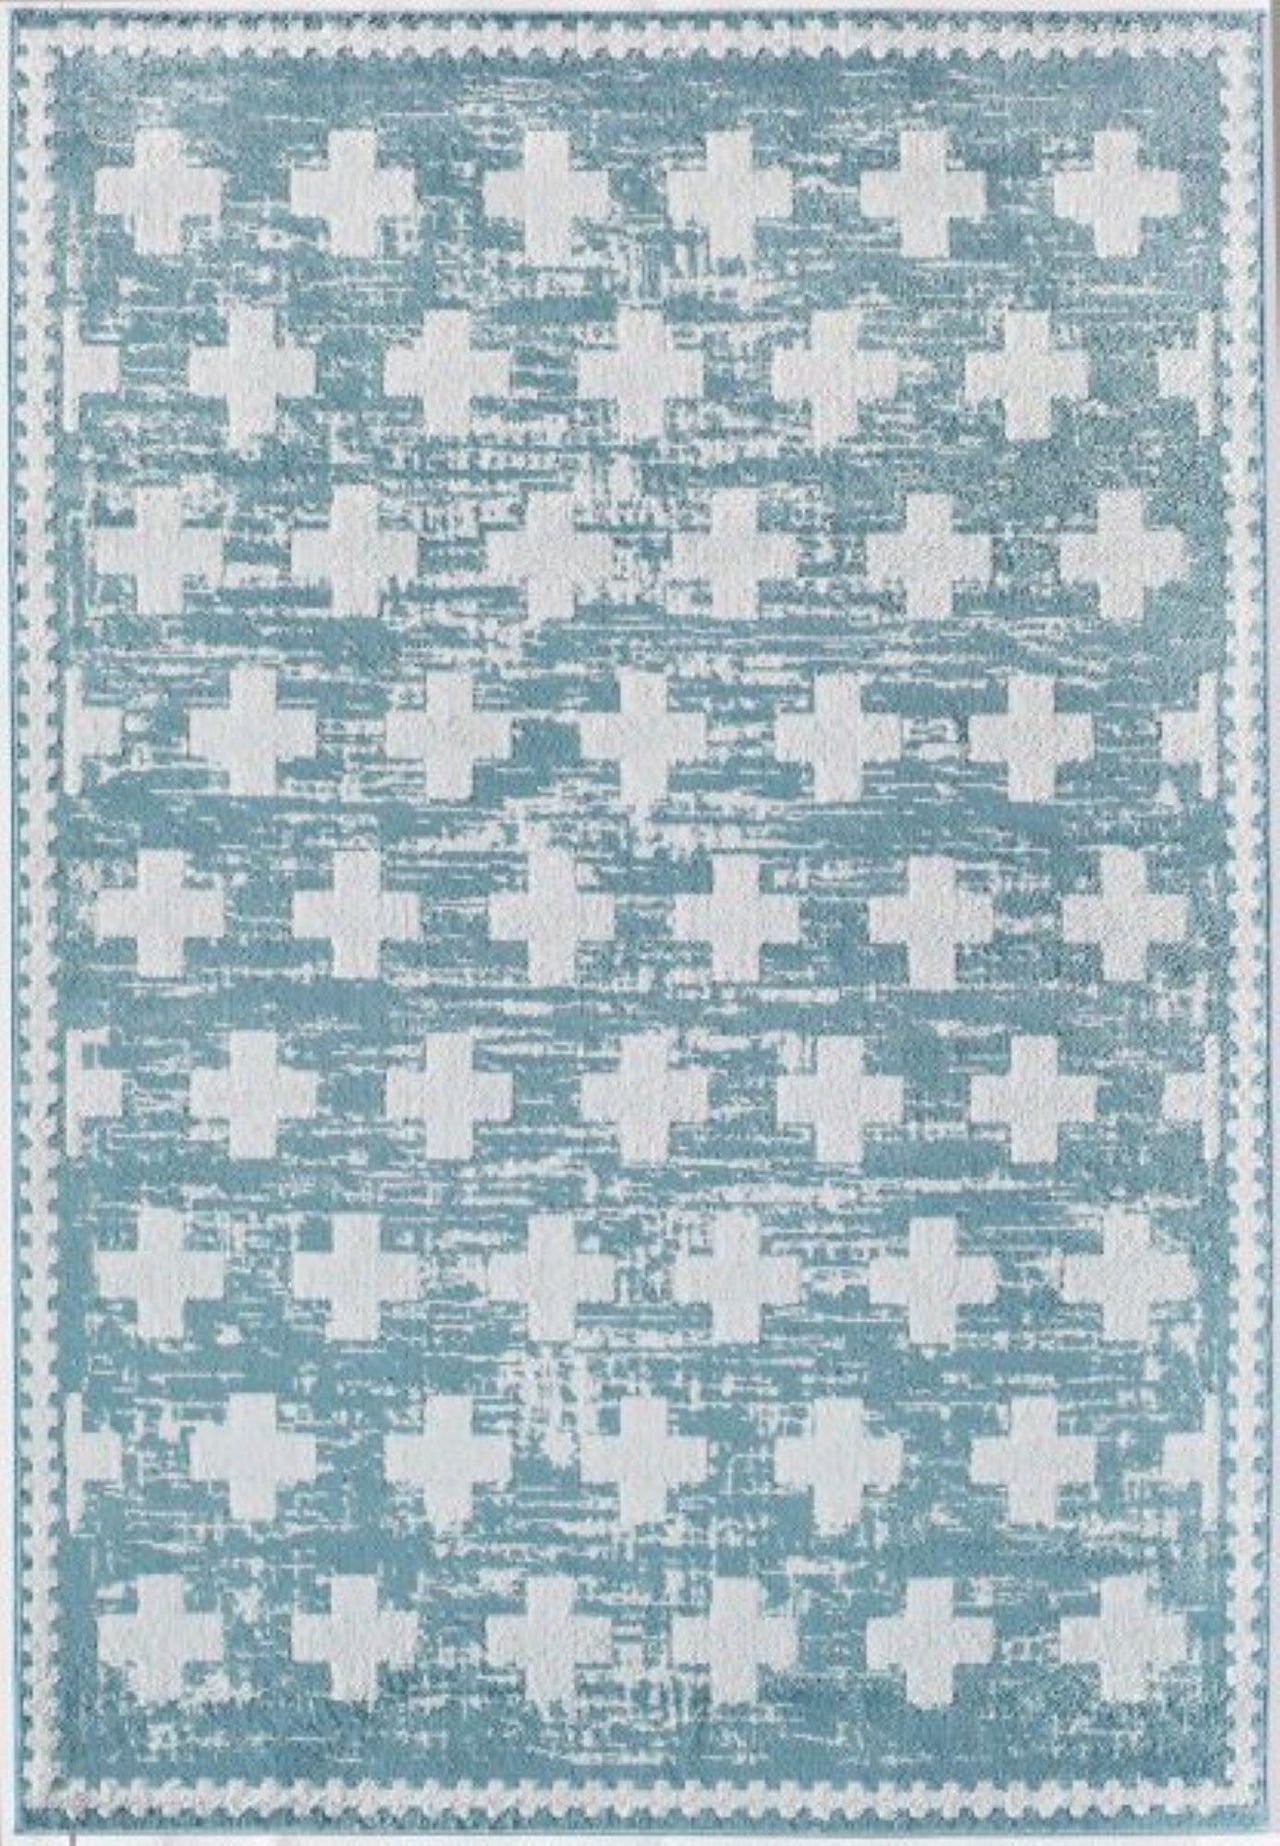 Little Seeds Serenity Impression Rug Teal Gray  8 x 10 - Gray